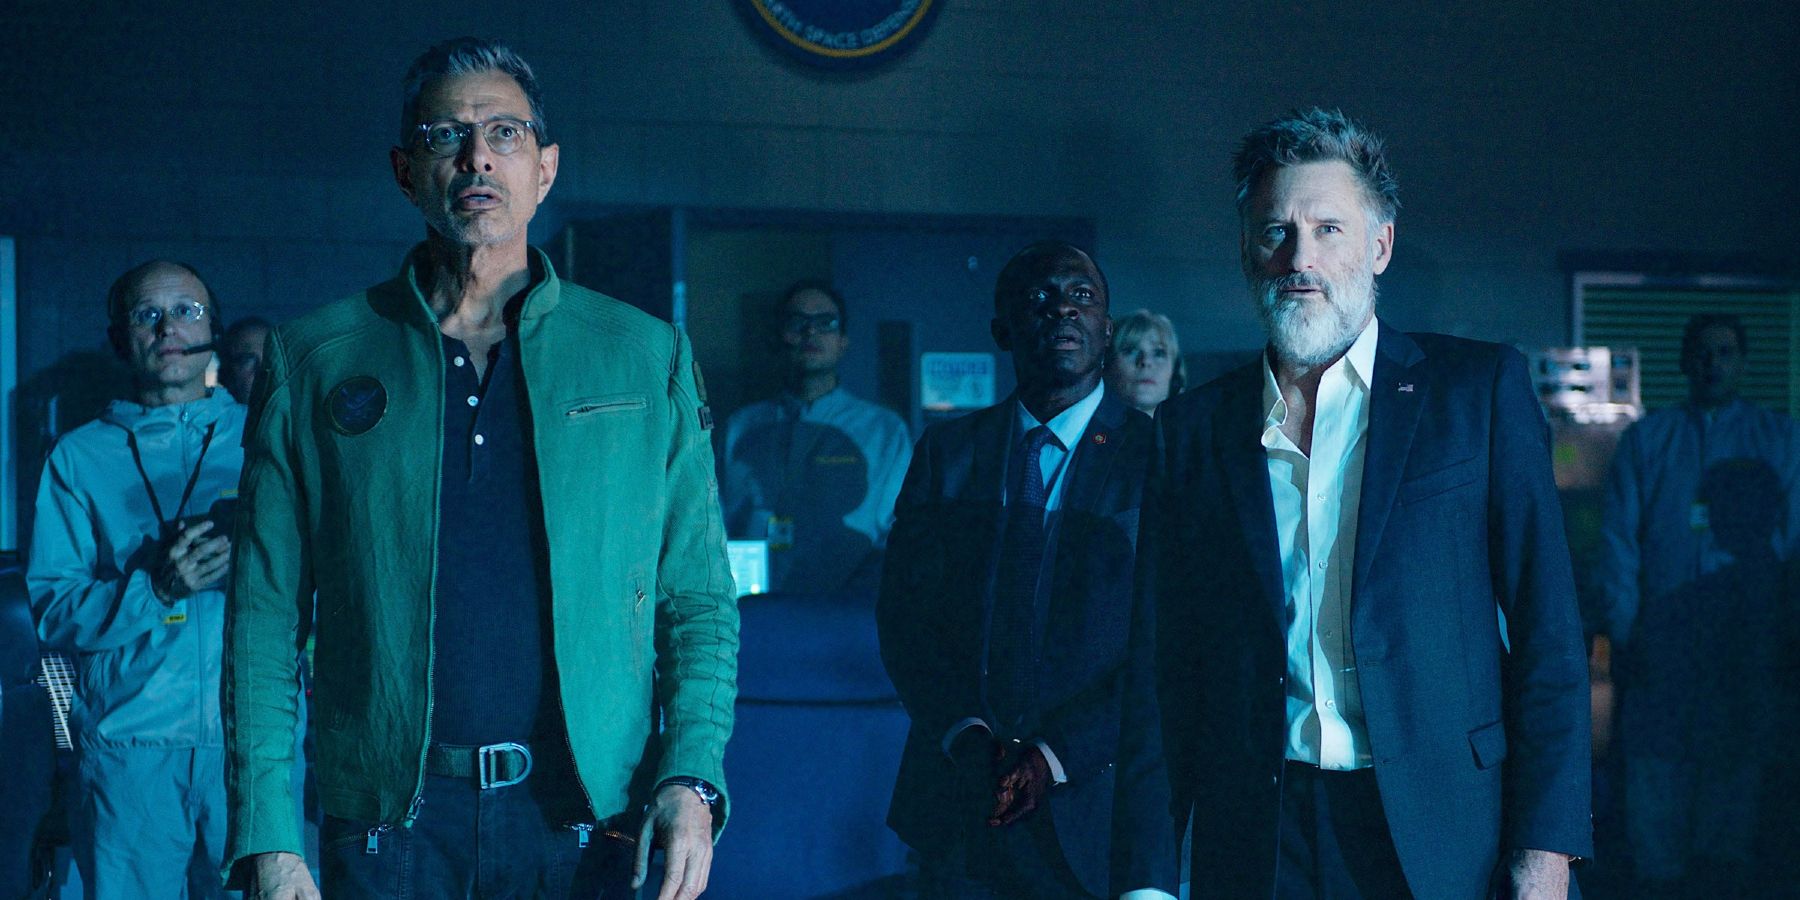 David And Will Staring In Shock Independence Day Resurgence